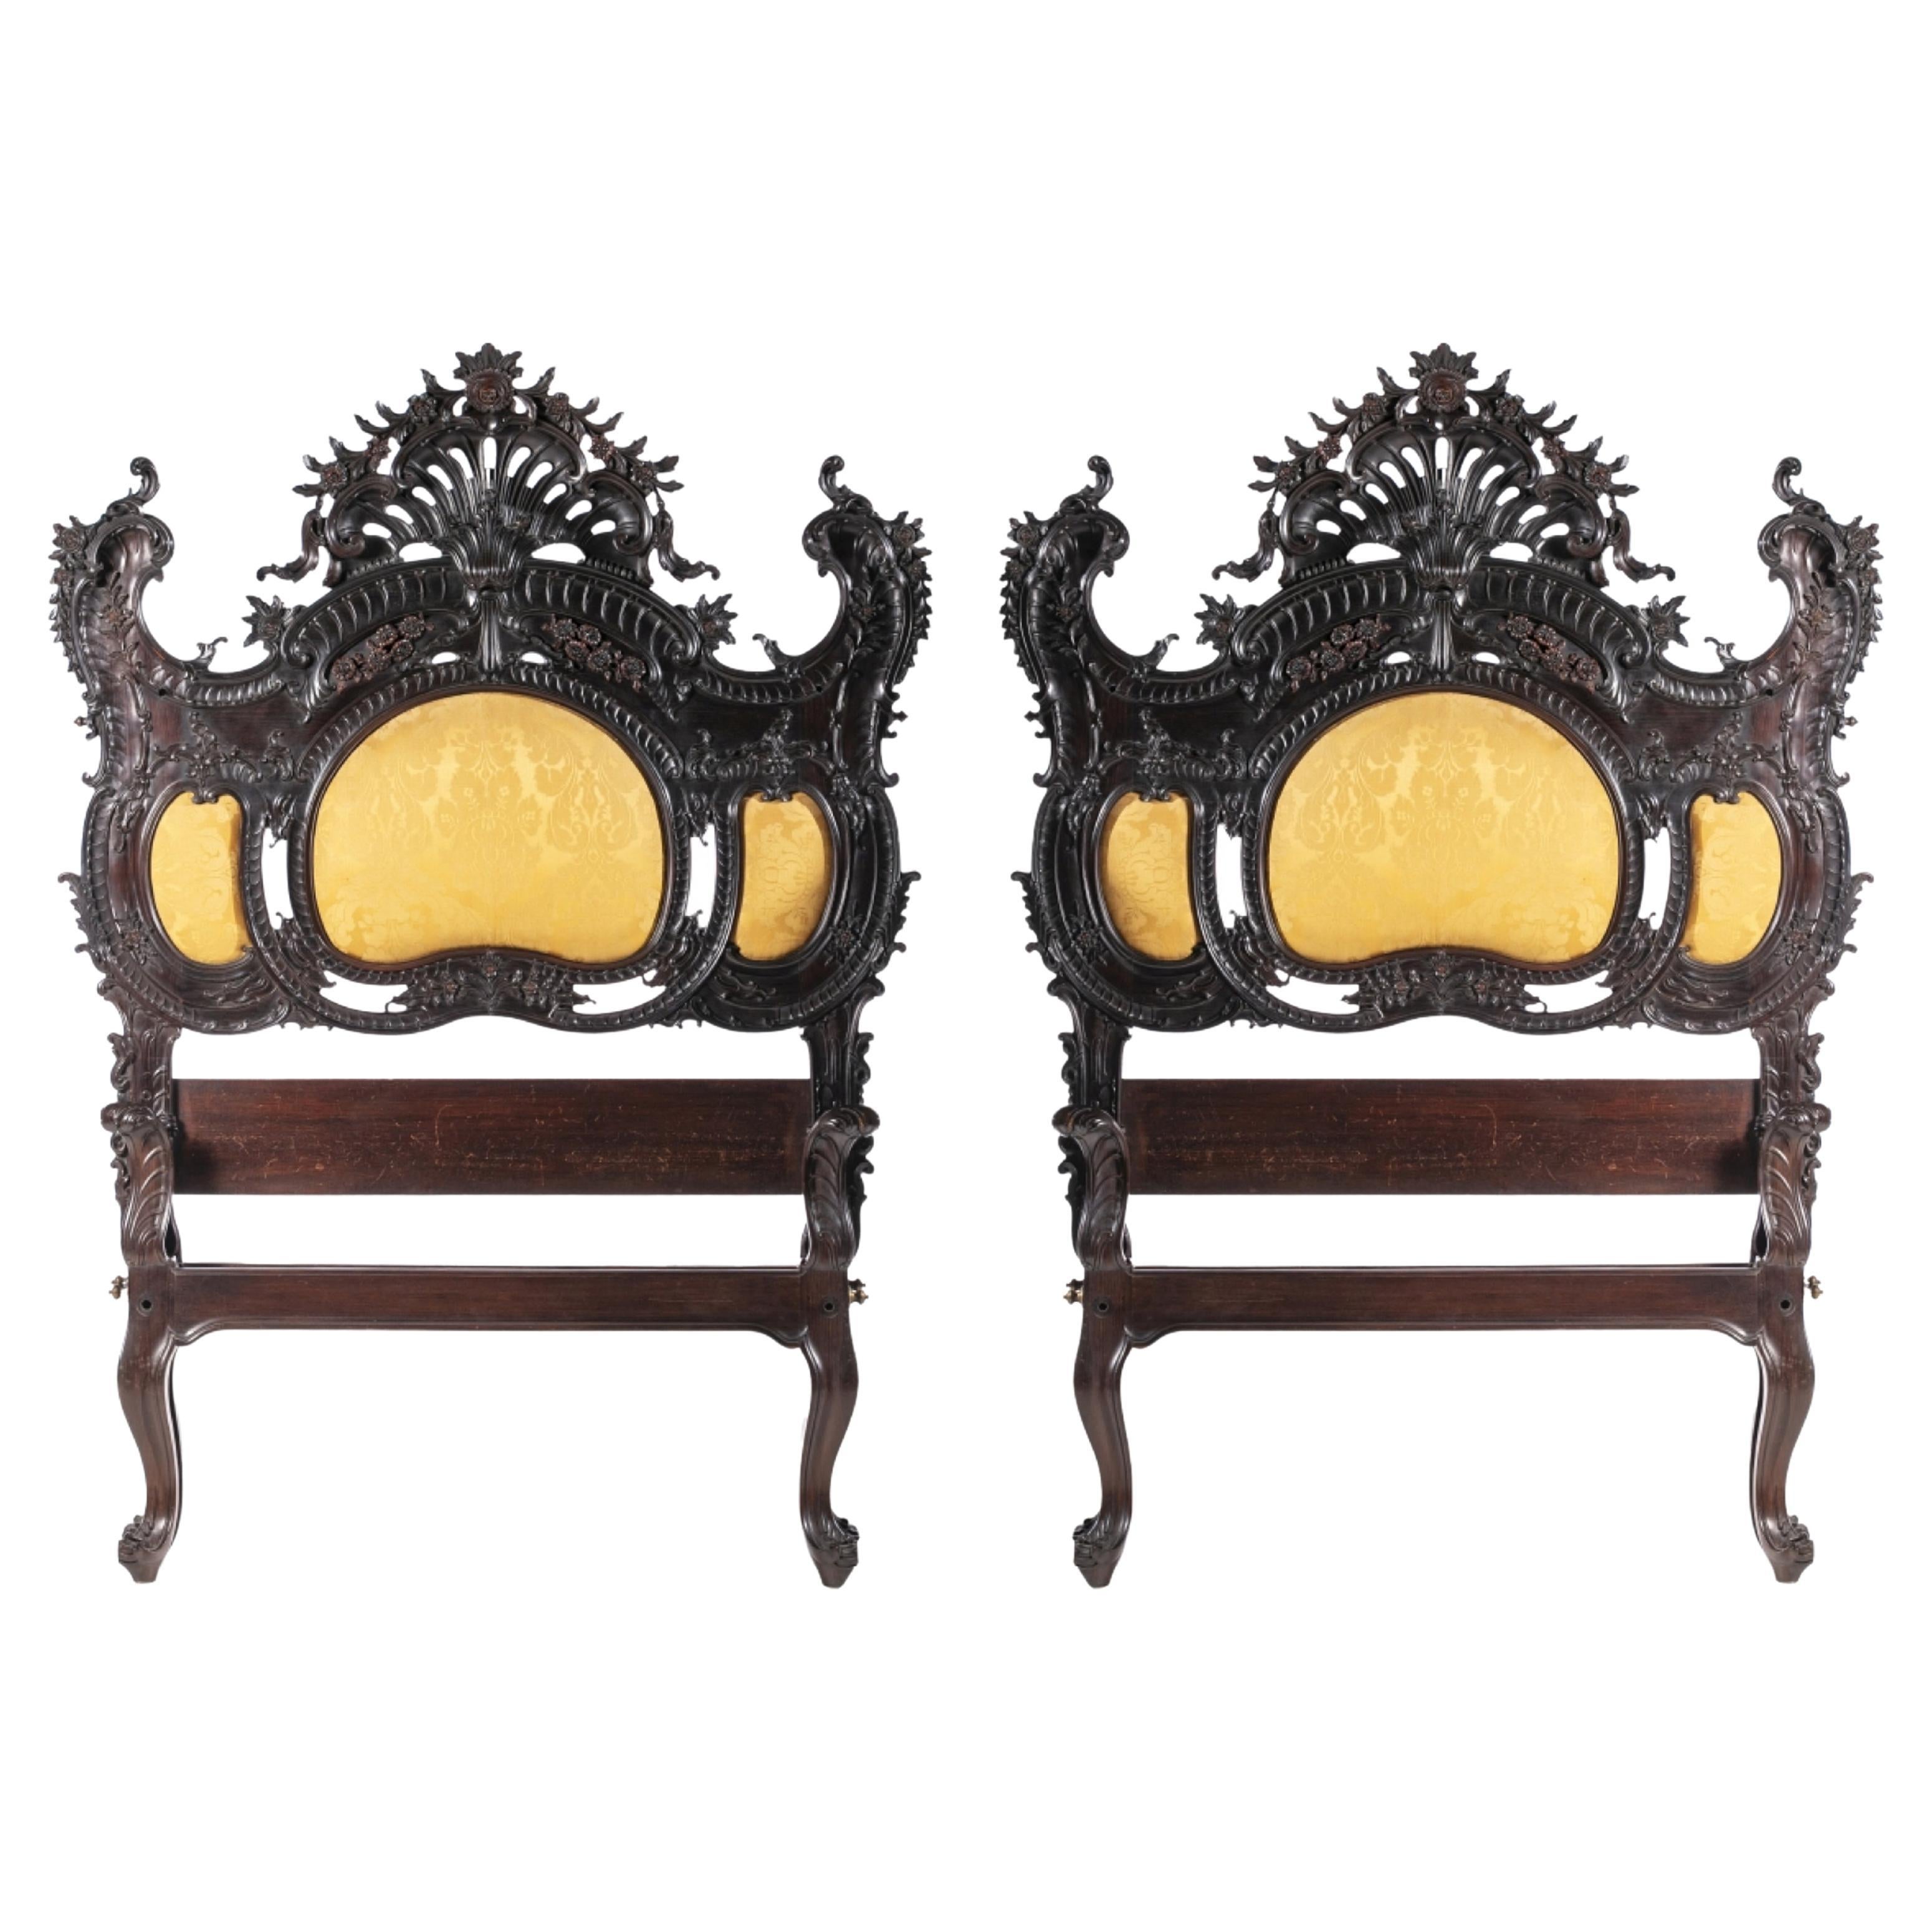 SPECTACULAR PAIR OF PORTUGUESE STYLE BEDS early 19th Century For Sale